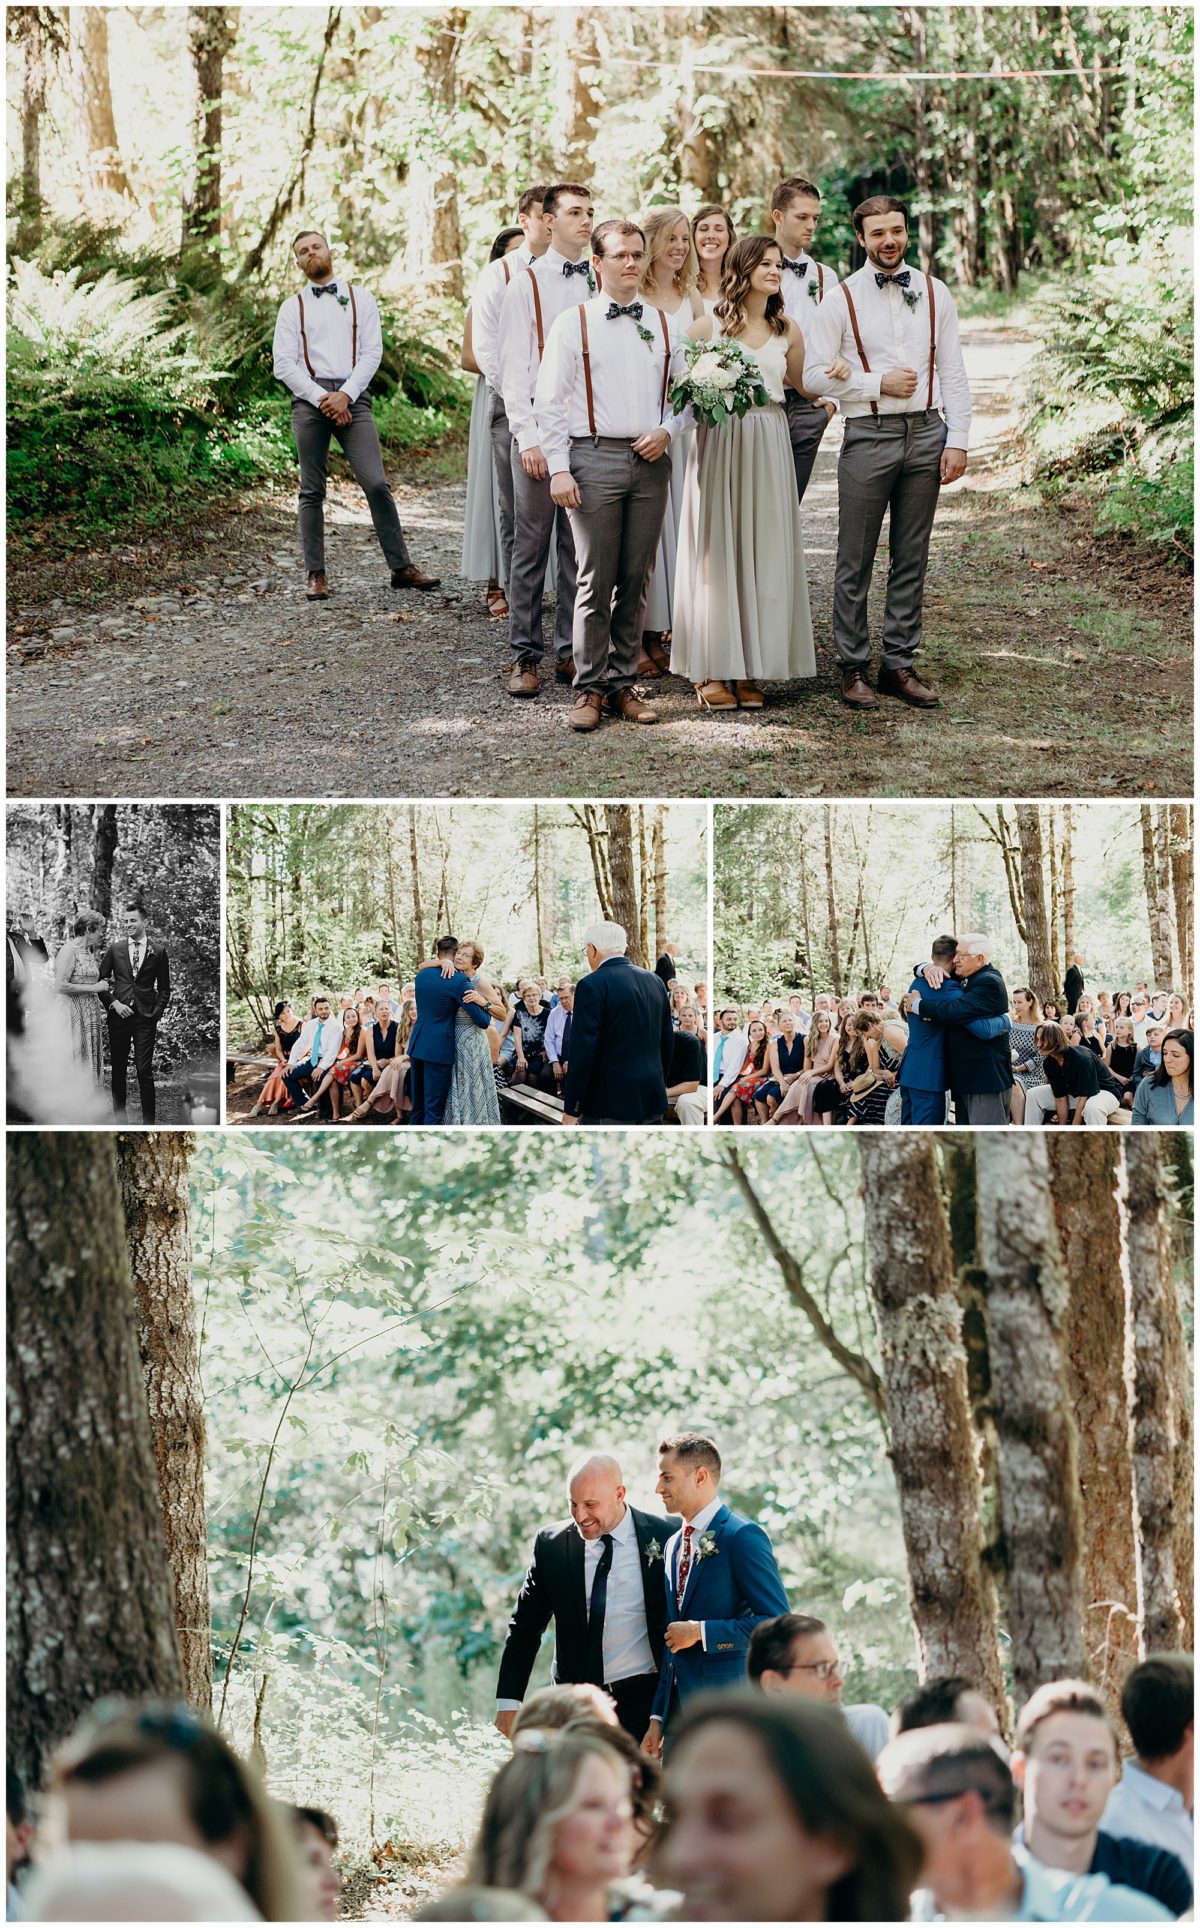 The wedding party gets ready to walk down the aisle at this Camp Cascade wedding. Photography by PNW wedding photographer, Briana Morrison